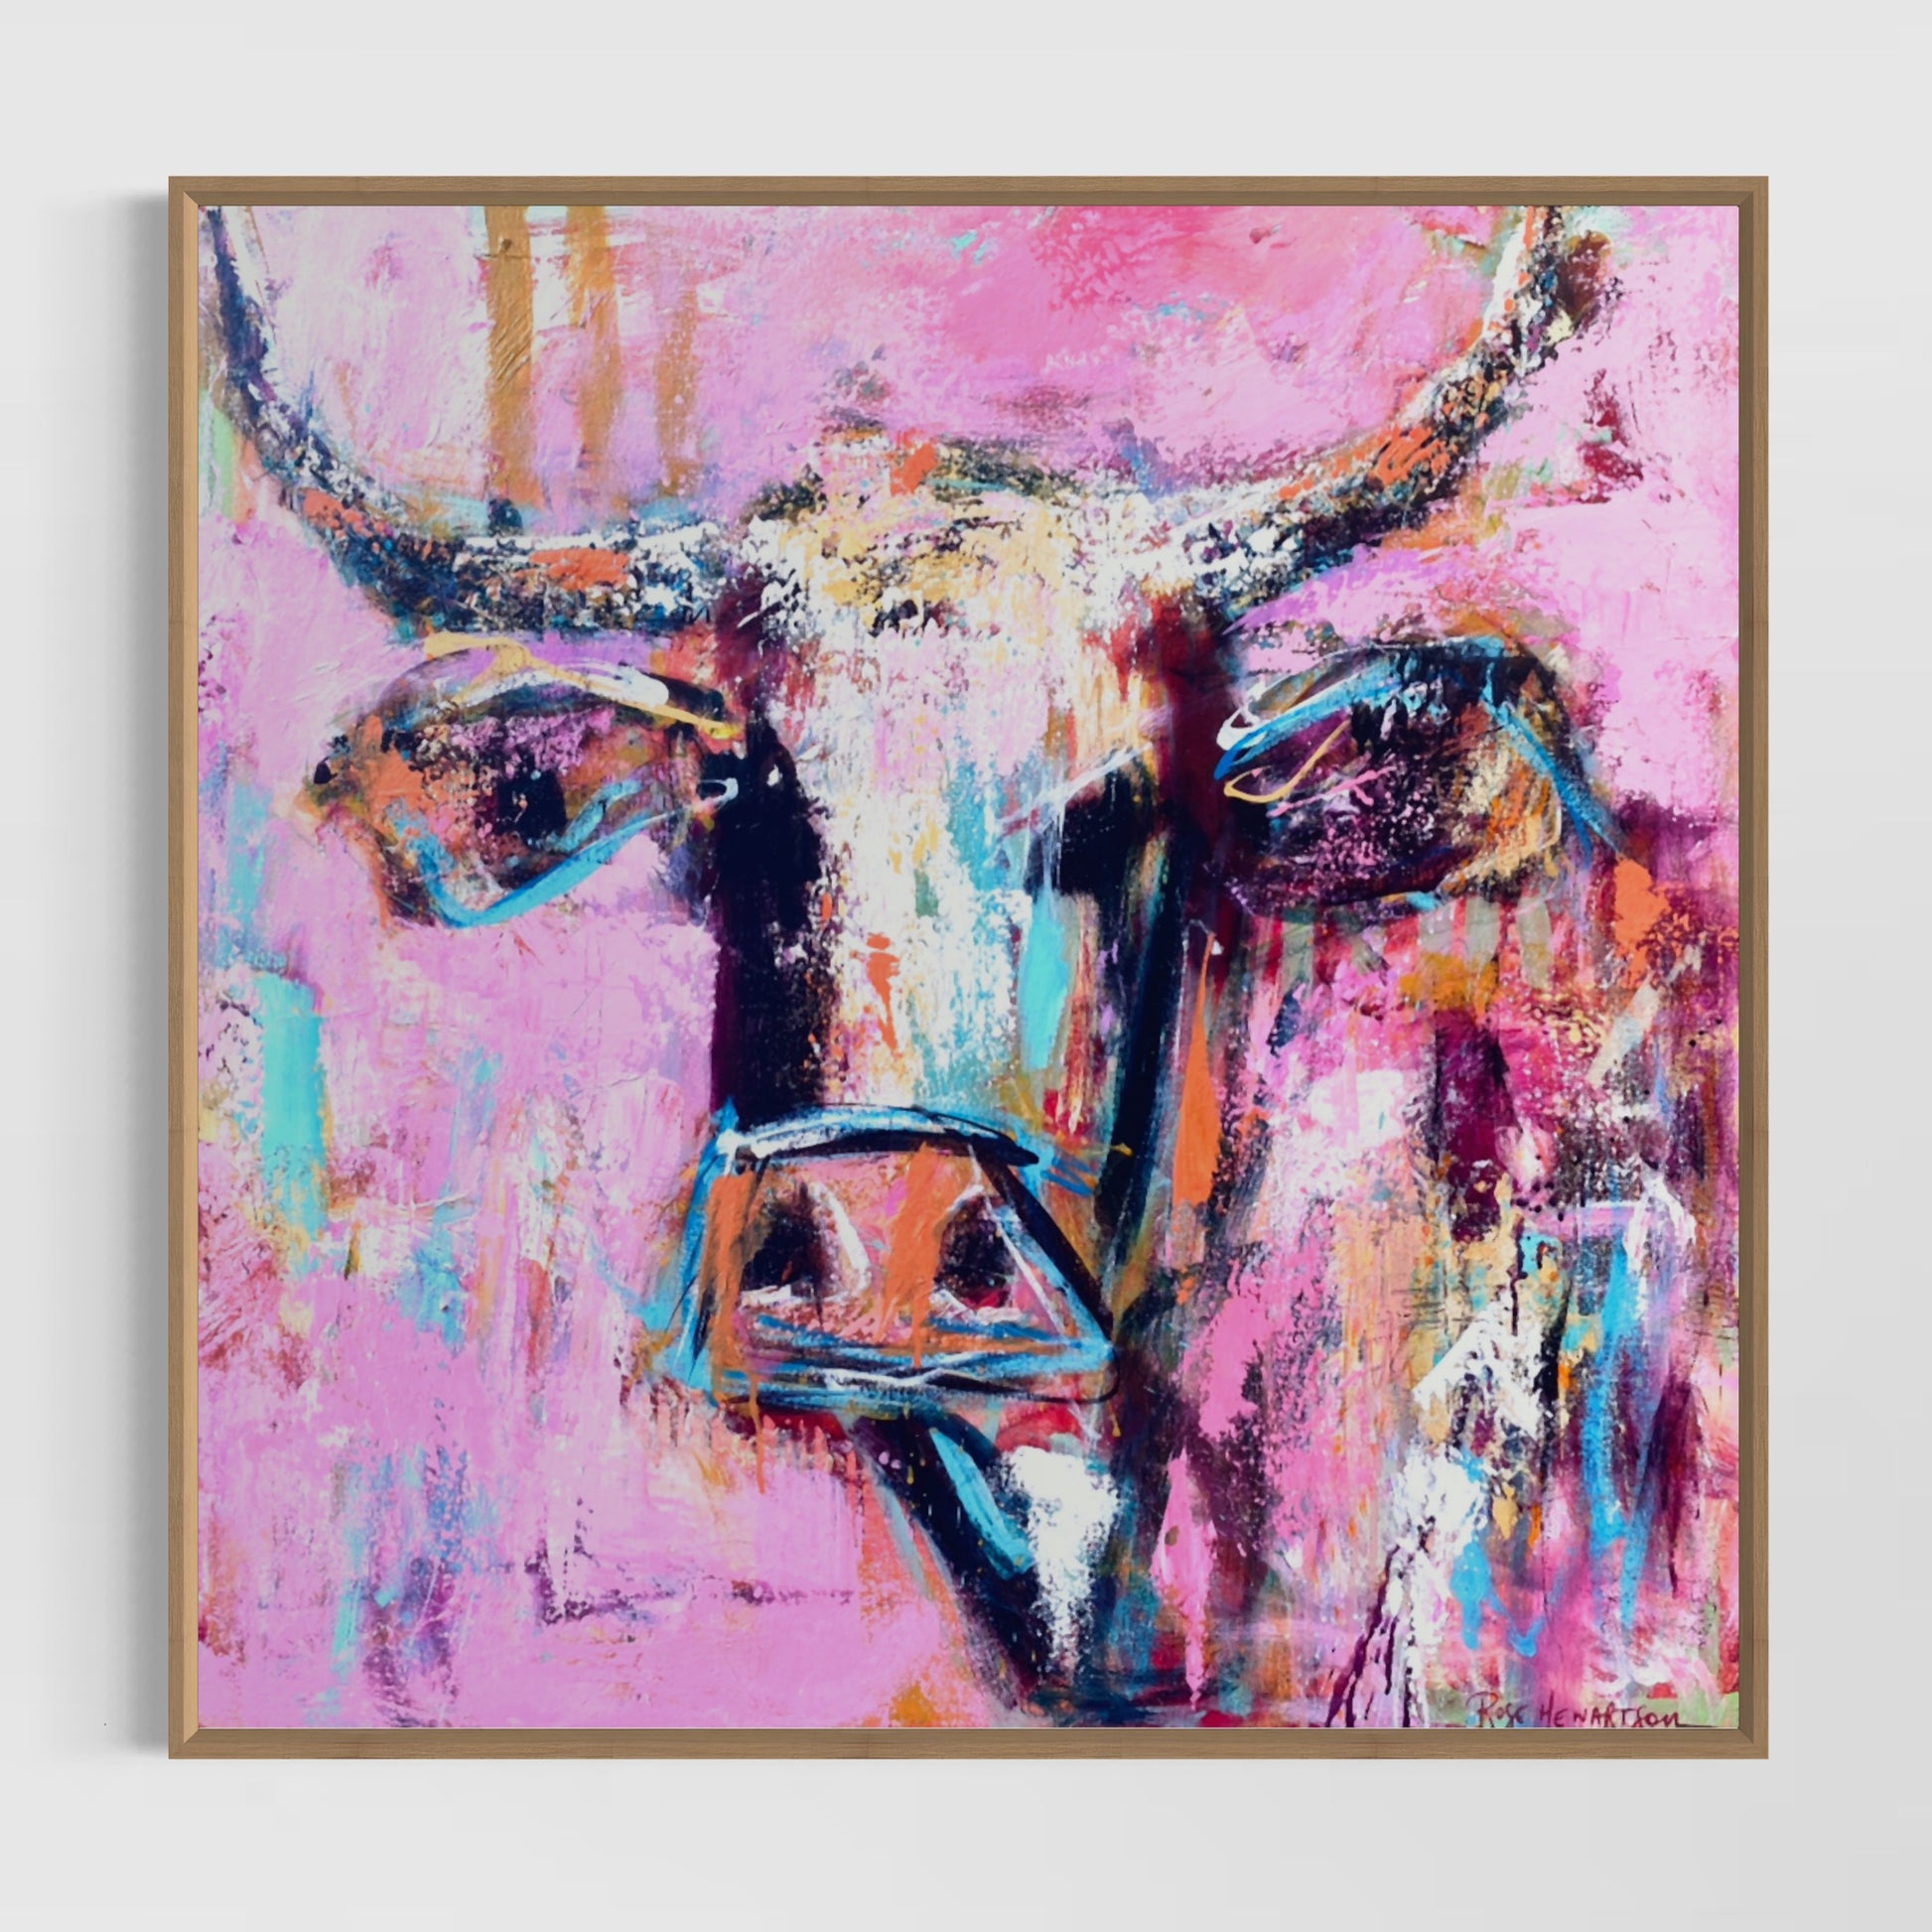 Lolly - by Australian Artist Rose Hewartson Original Abstract Cow Painting on Canvas Framed 90 x 90cm Statement Piece